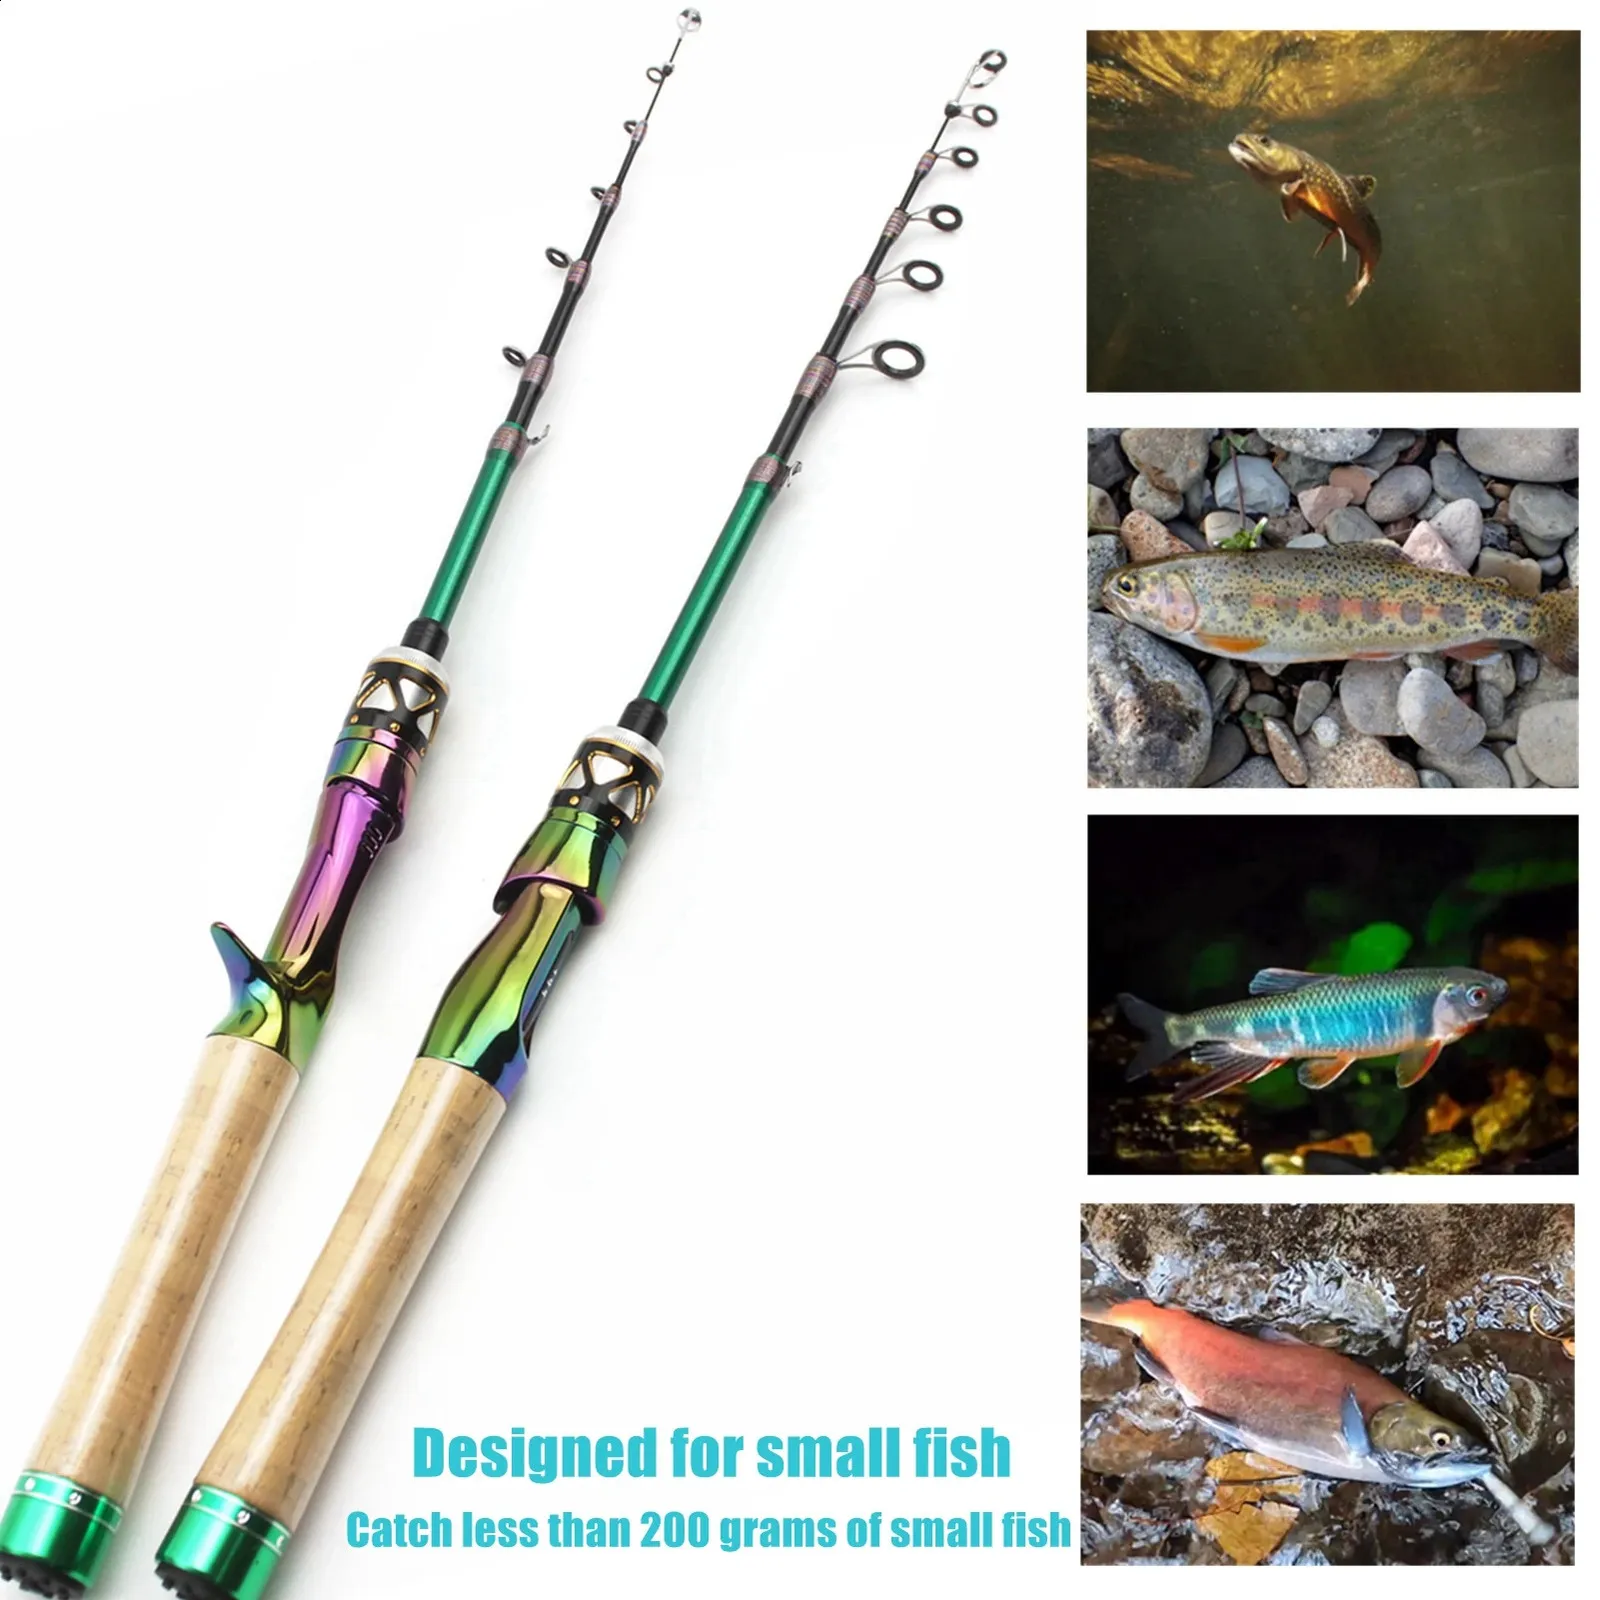 Ultra Light Carbon Second Hand Boat Rods 1.8M/1.98M Size, Telescopic  Casting Spinning Pocket Rod For Small Fish Pole, 1 5g Stream Model 231109  From Jia09, $9.98